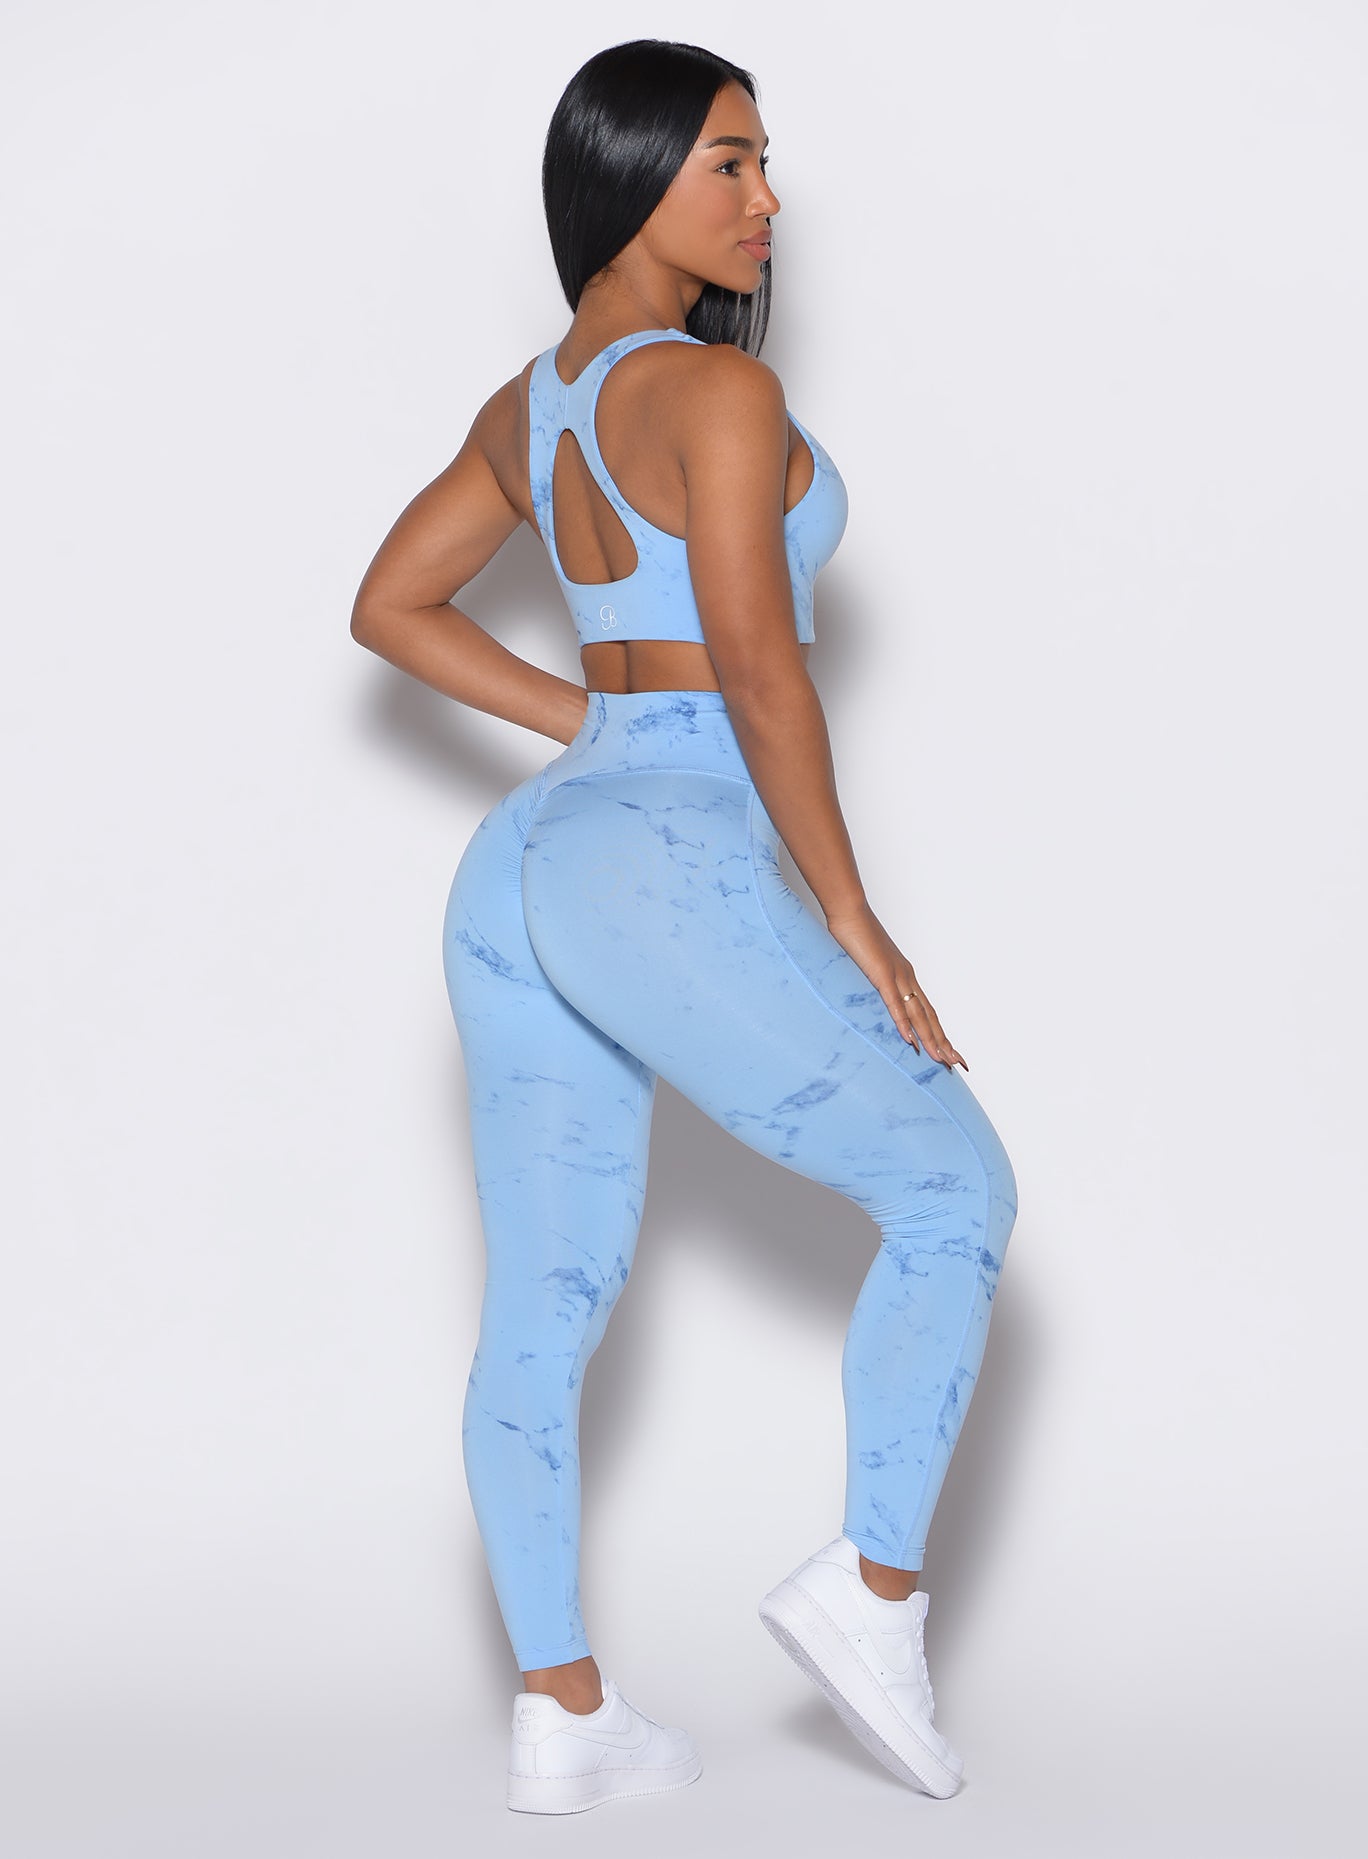 right side  profile view of a model angled slightly to her left wearing our fit marble leggings in Blue Jay color along with a matching bra